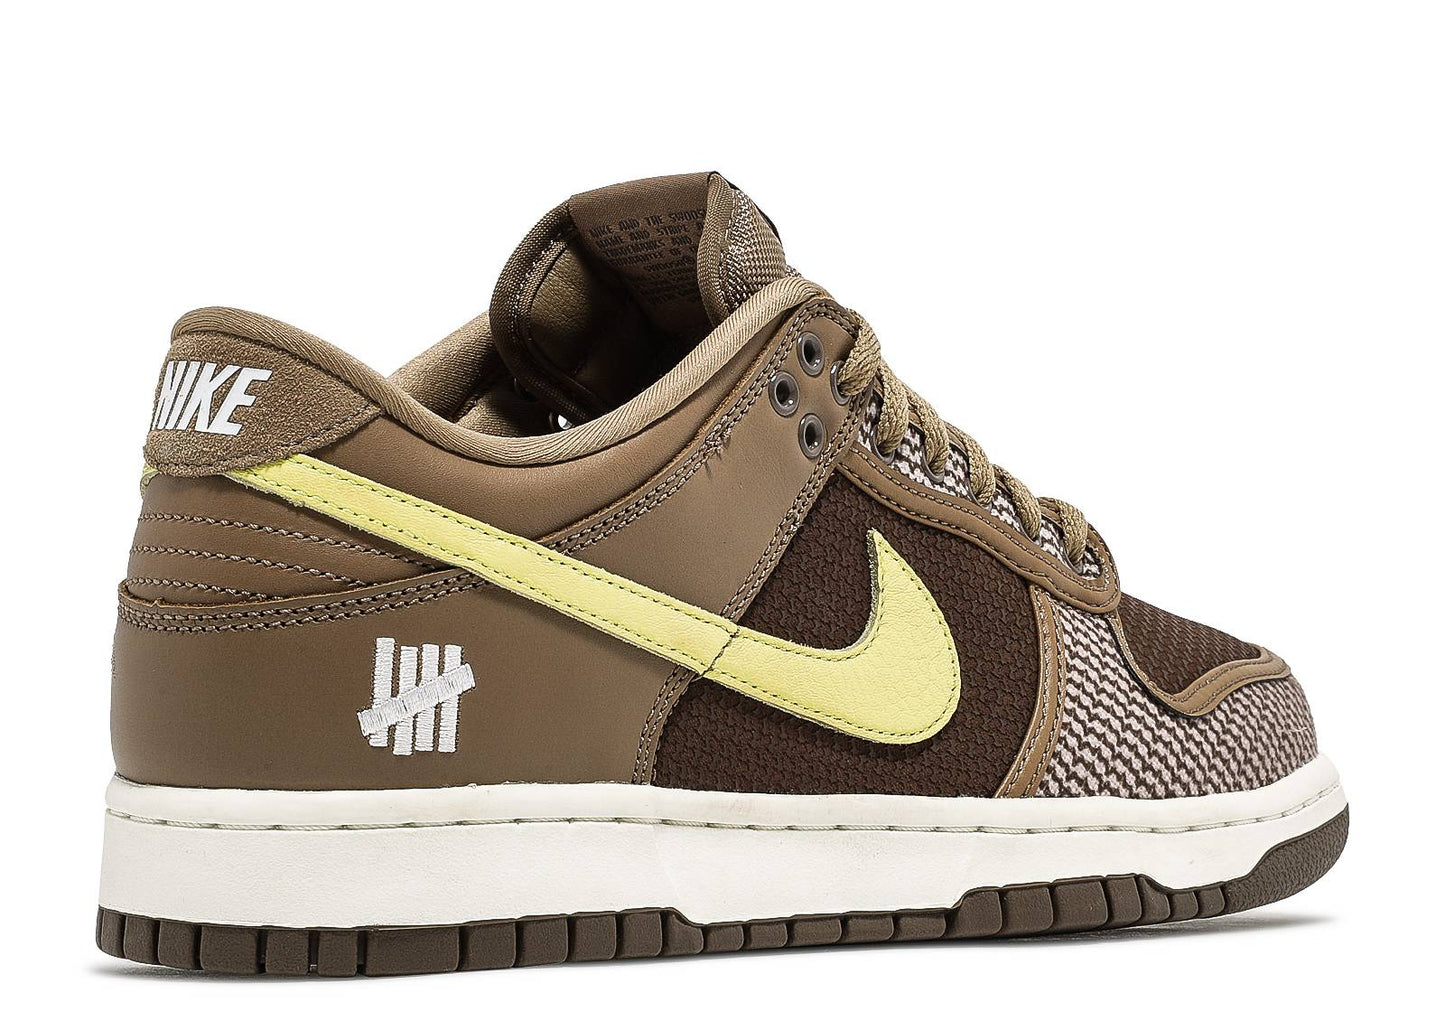 Undefeated x Nike Dunk Low SP "Canteen"